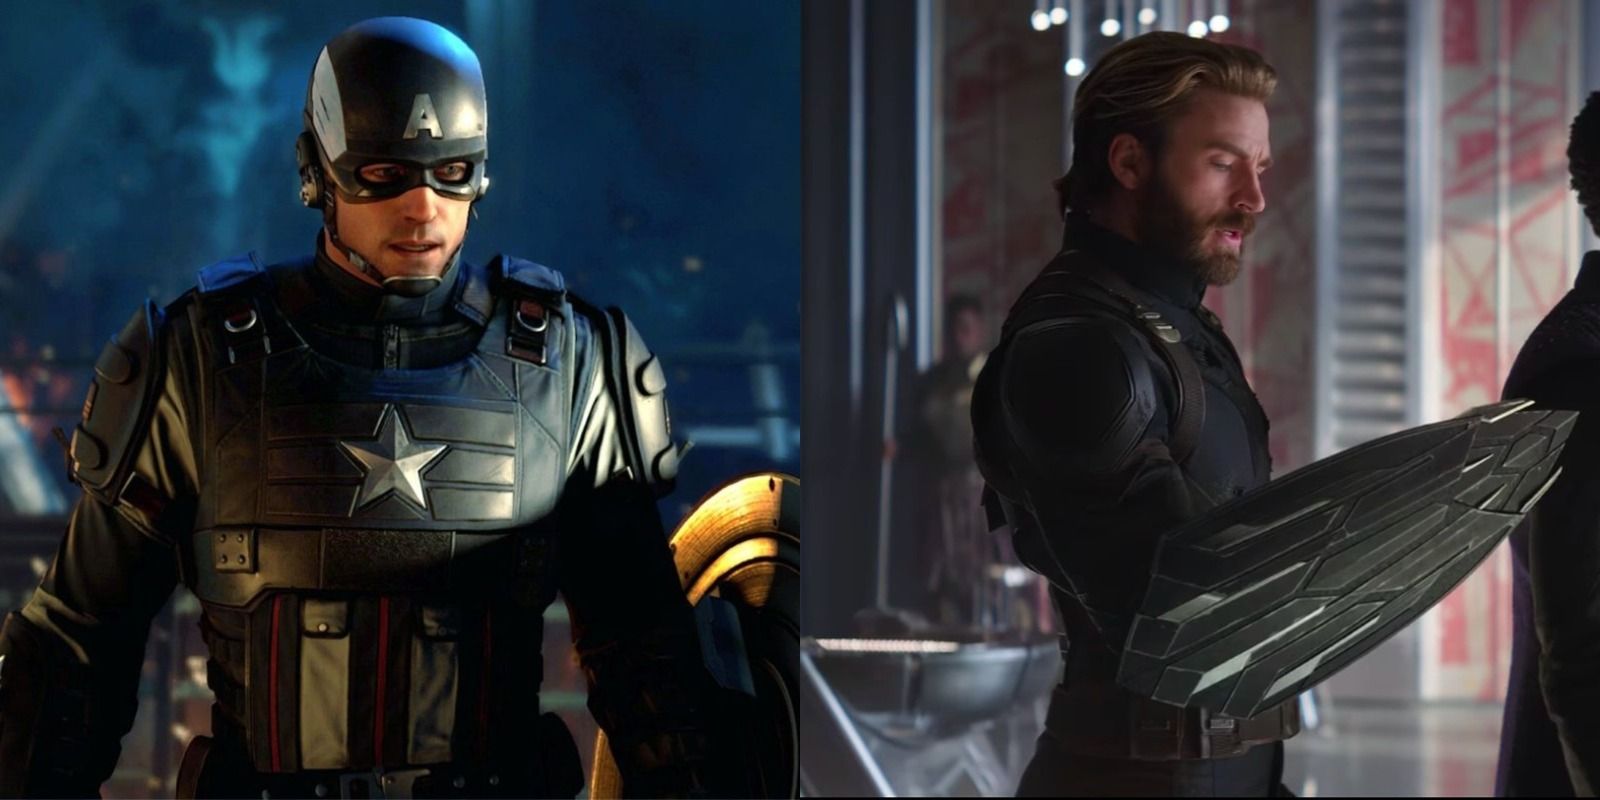 Captain America In Both Game And Movie - Marvel's Avengers